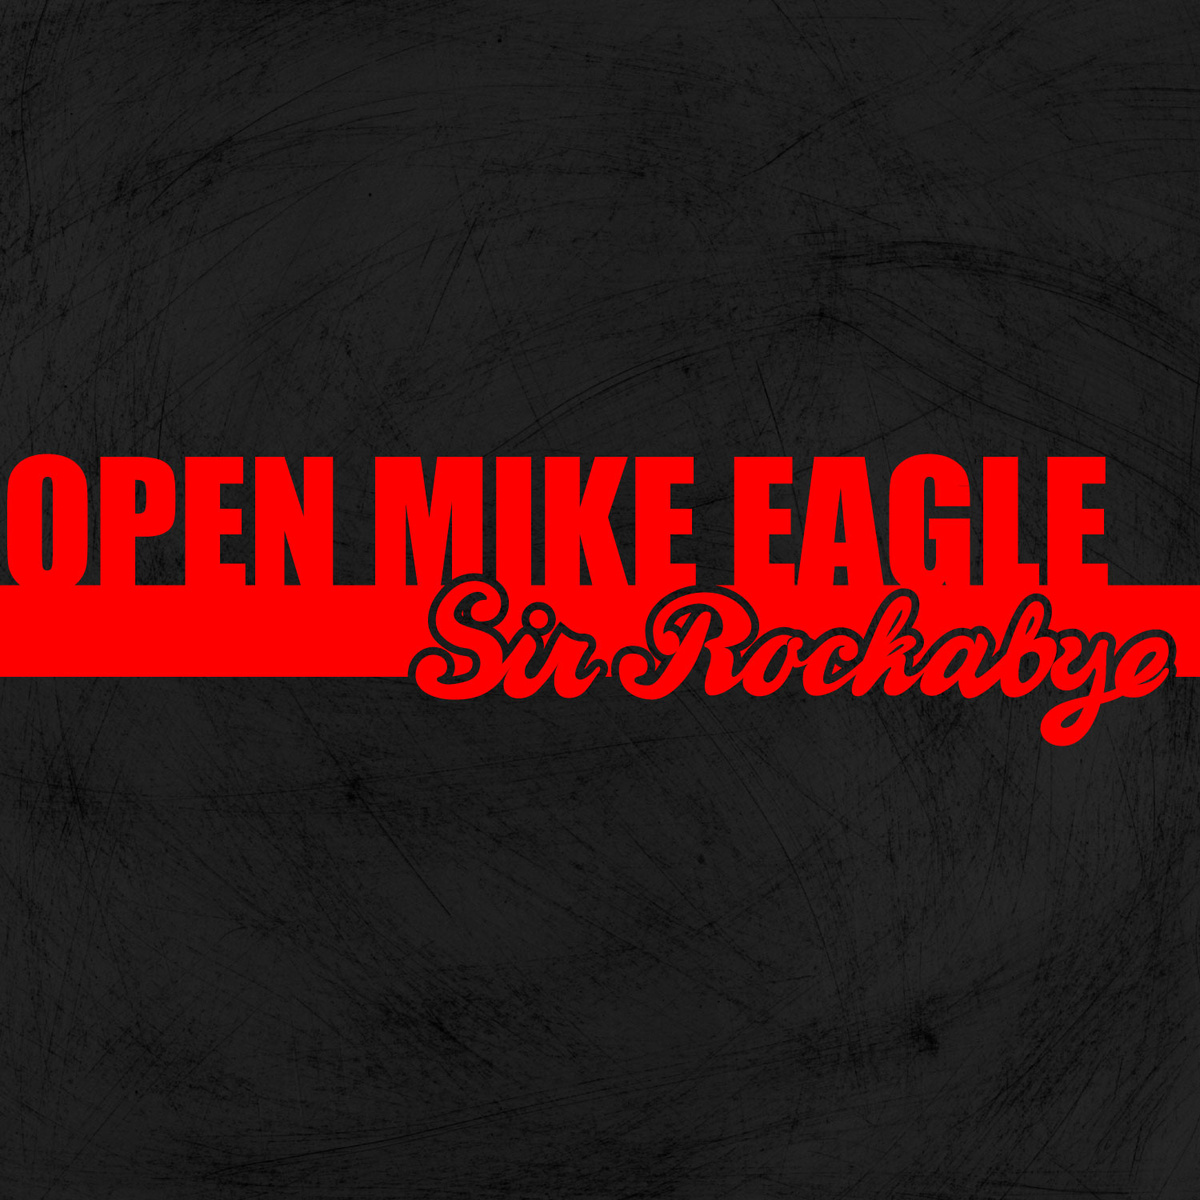 Day 9 of 30 Days of Homeboy Sandman: Open Mike Eagle "Sir Rockabye" Release | @Mike_Eagle